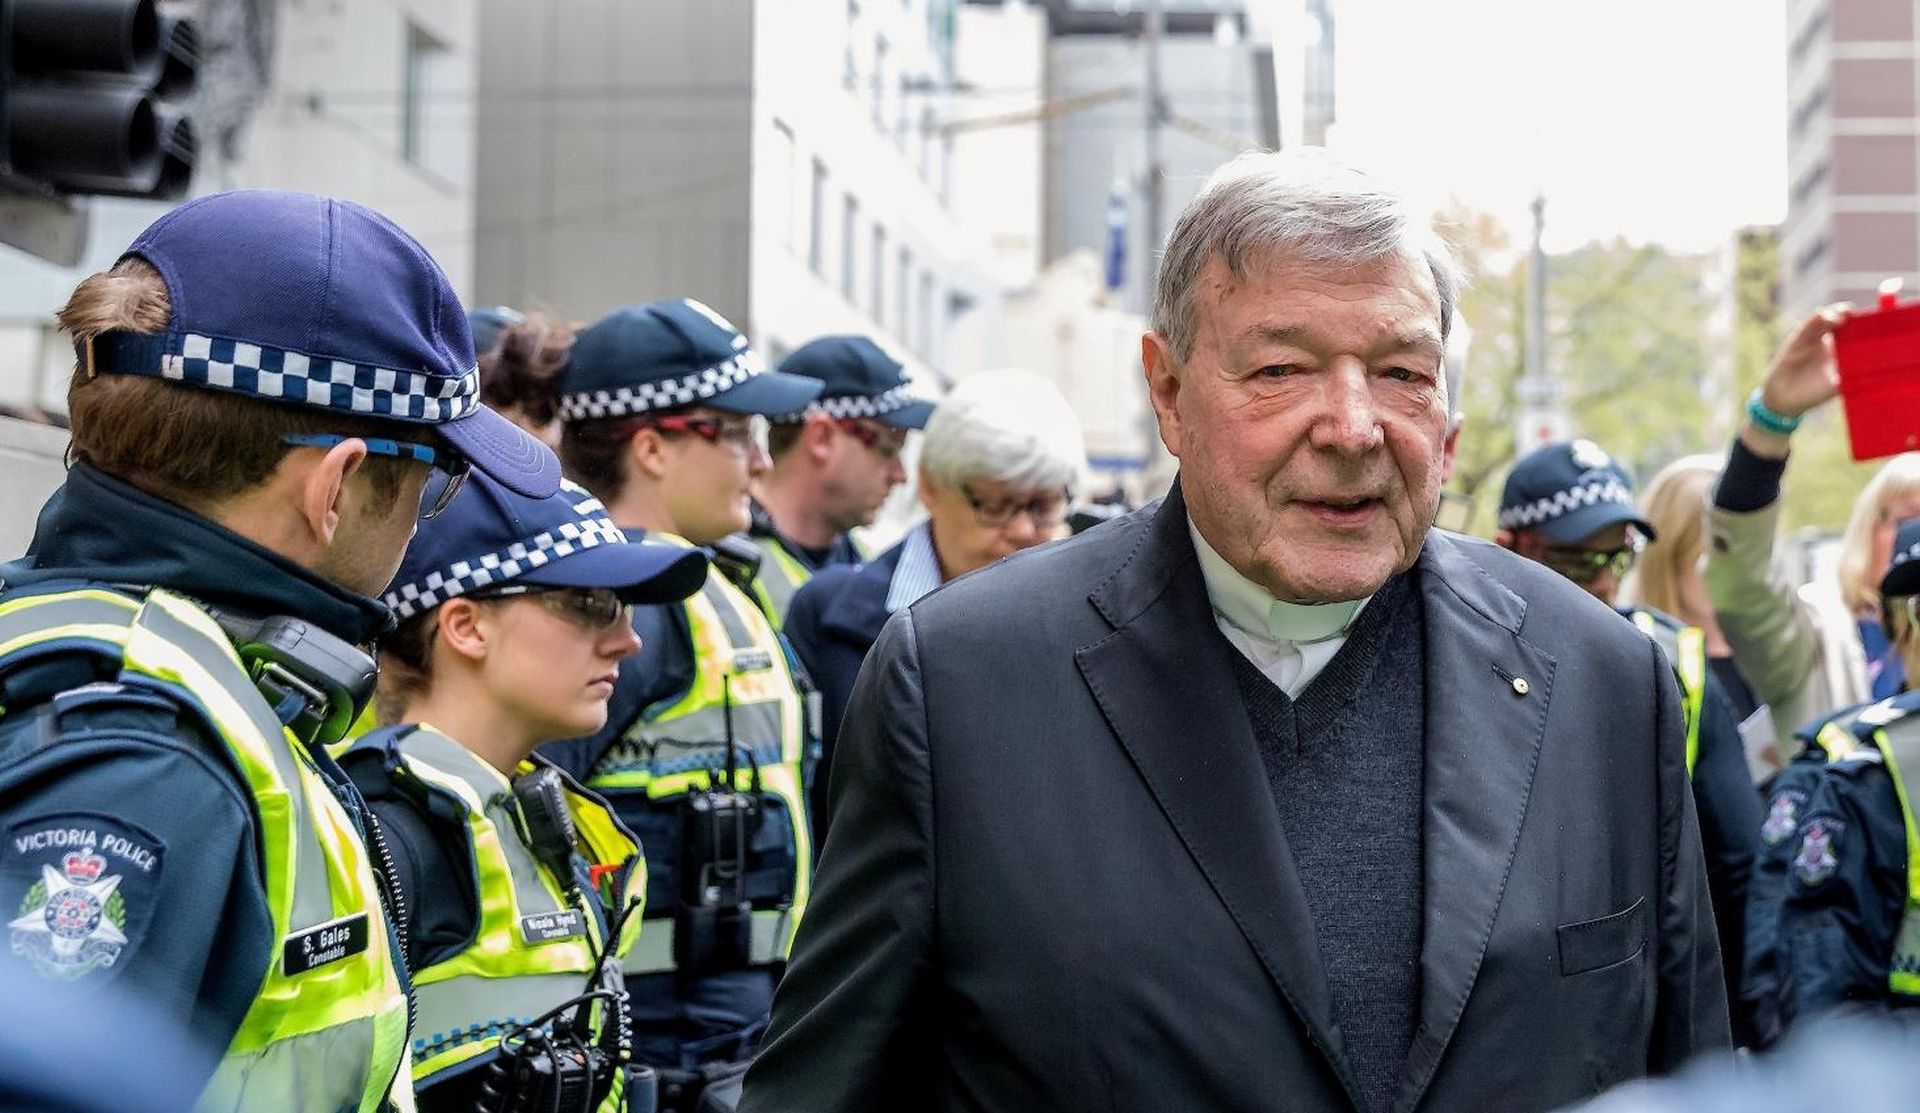 FILE PHOTO - Vatican Treasurer Cardinal George Pell is surrounded by Australian police as he leaves the Melbourne Magistrates Court in Australia FILE PHOTO - Vatican Treasurer Cardinal George Pell is surrounded by Australian police as he leaves the Melbourne Magistrates Court in Australia, October 6, 2017.    REUTERS/Mark Dadswell/File Photo Mark Dadswell